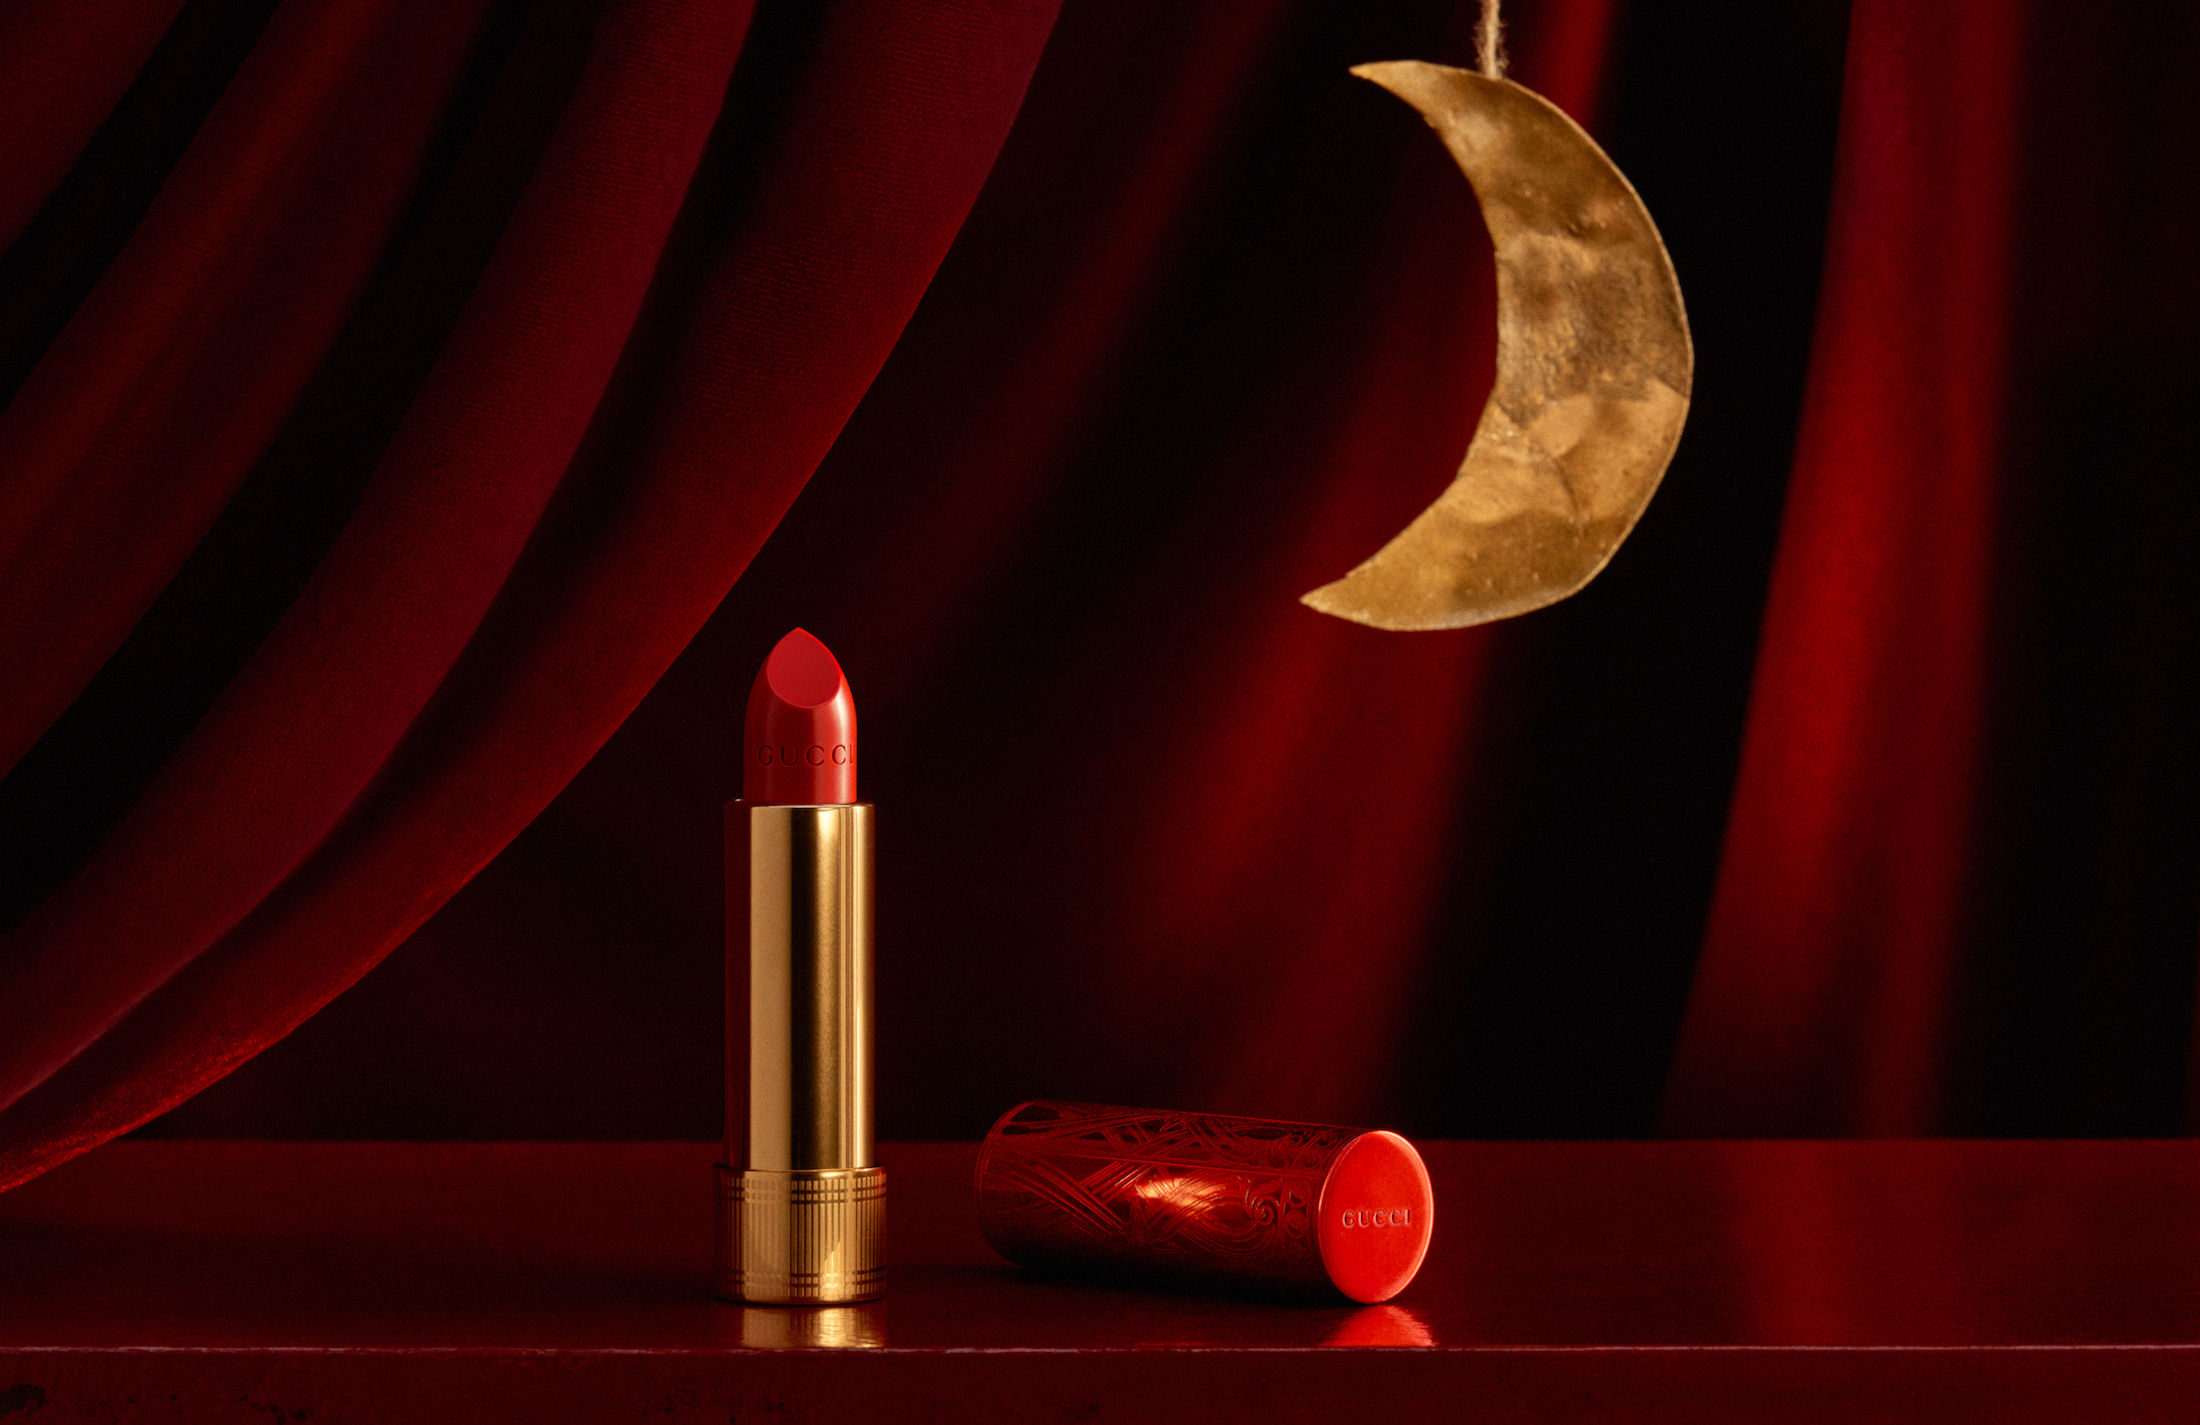 These Limited Edition Beauty Launches Are Inspired By Chinese New Year 2020